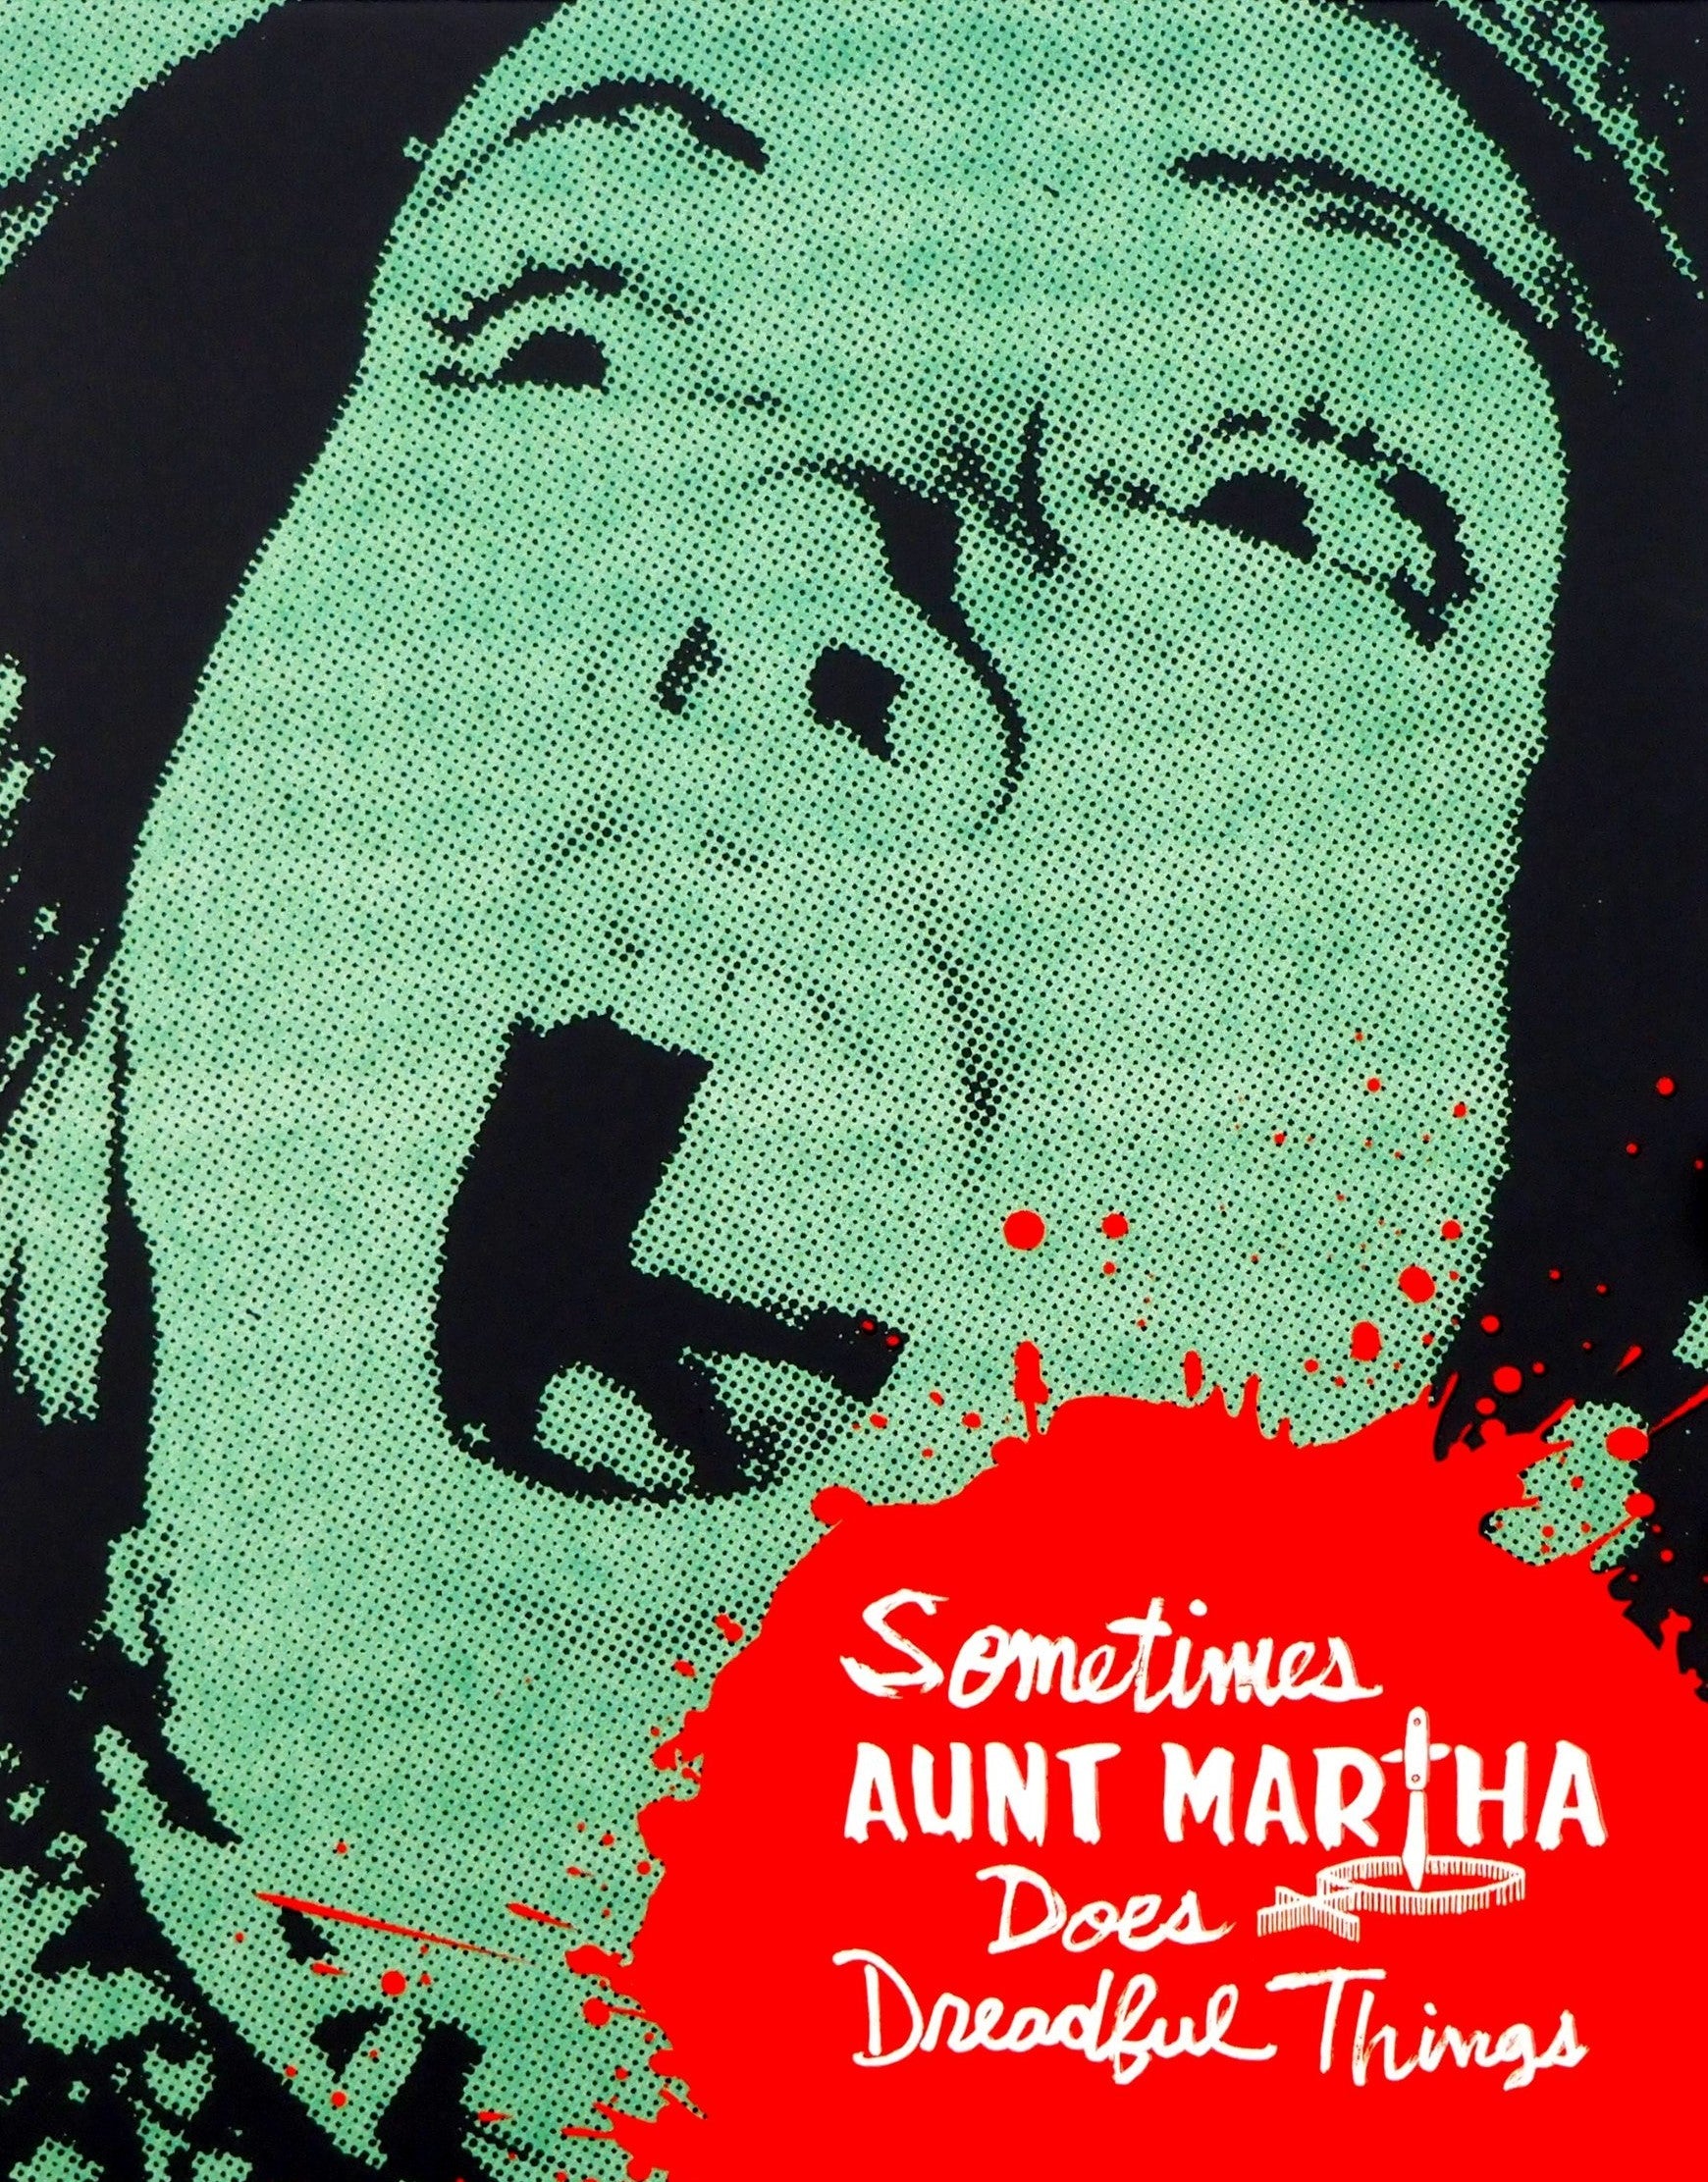 Sometimes Aunt Martha Does Dreadful Things (Limited Edition) Blu-Ray Blu-Ray